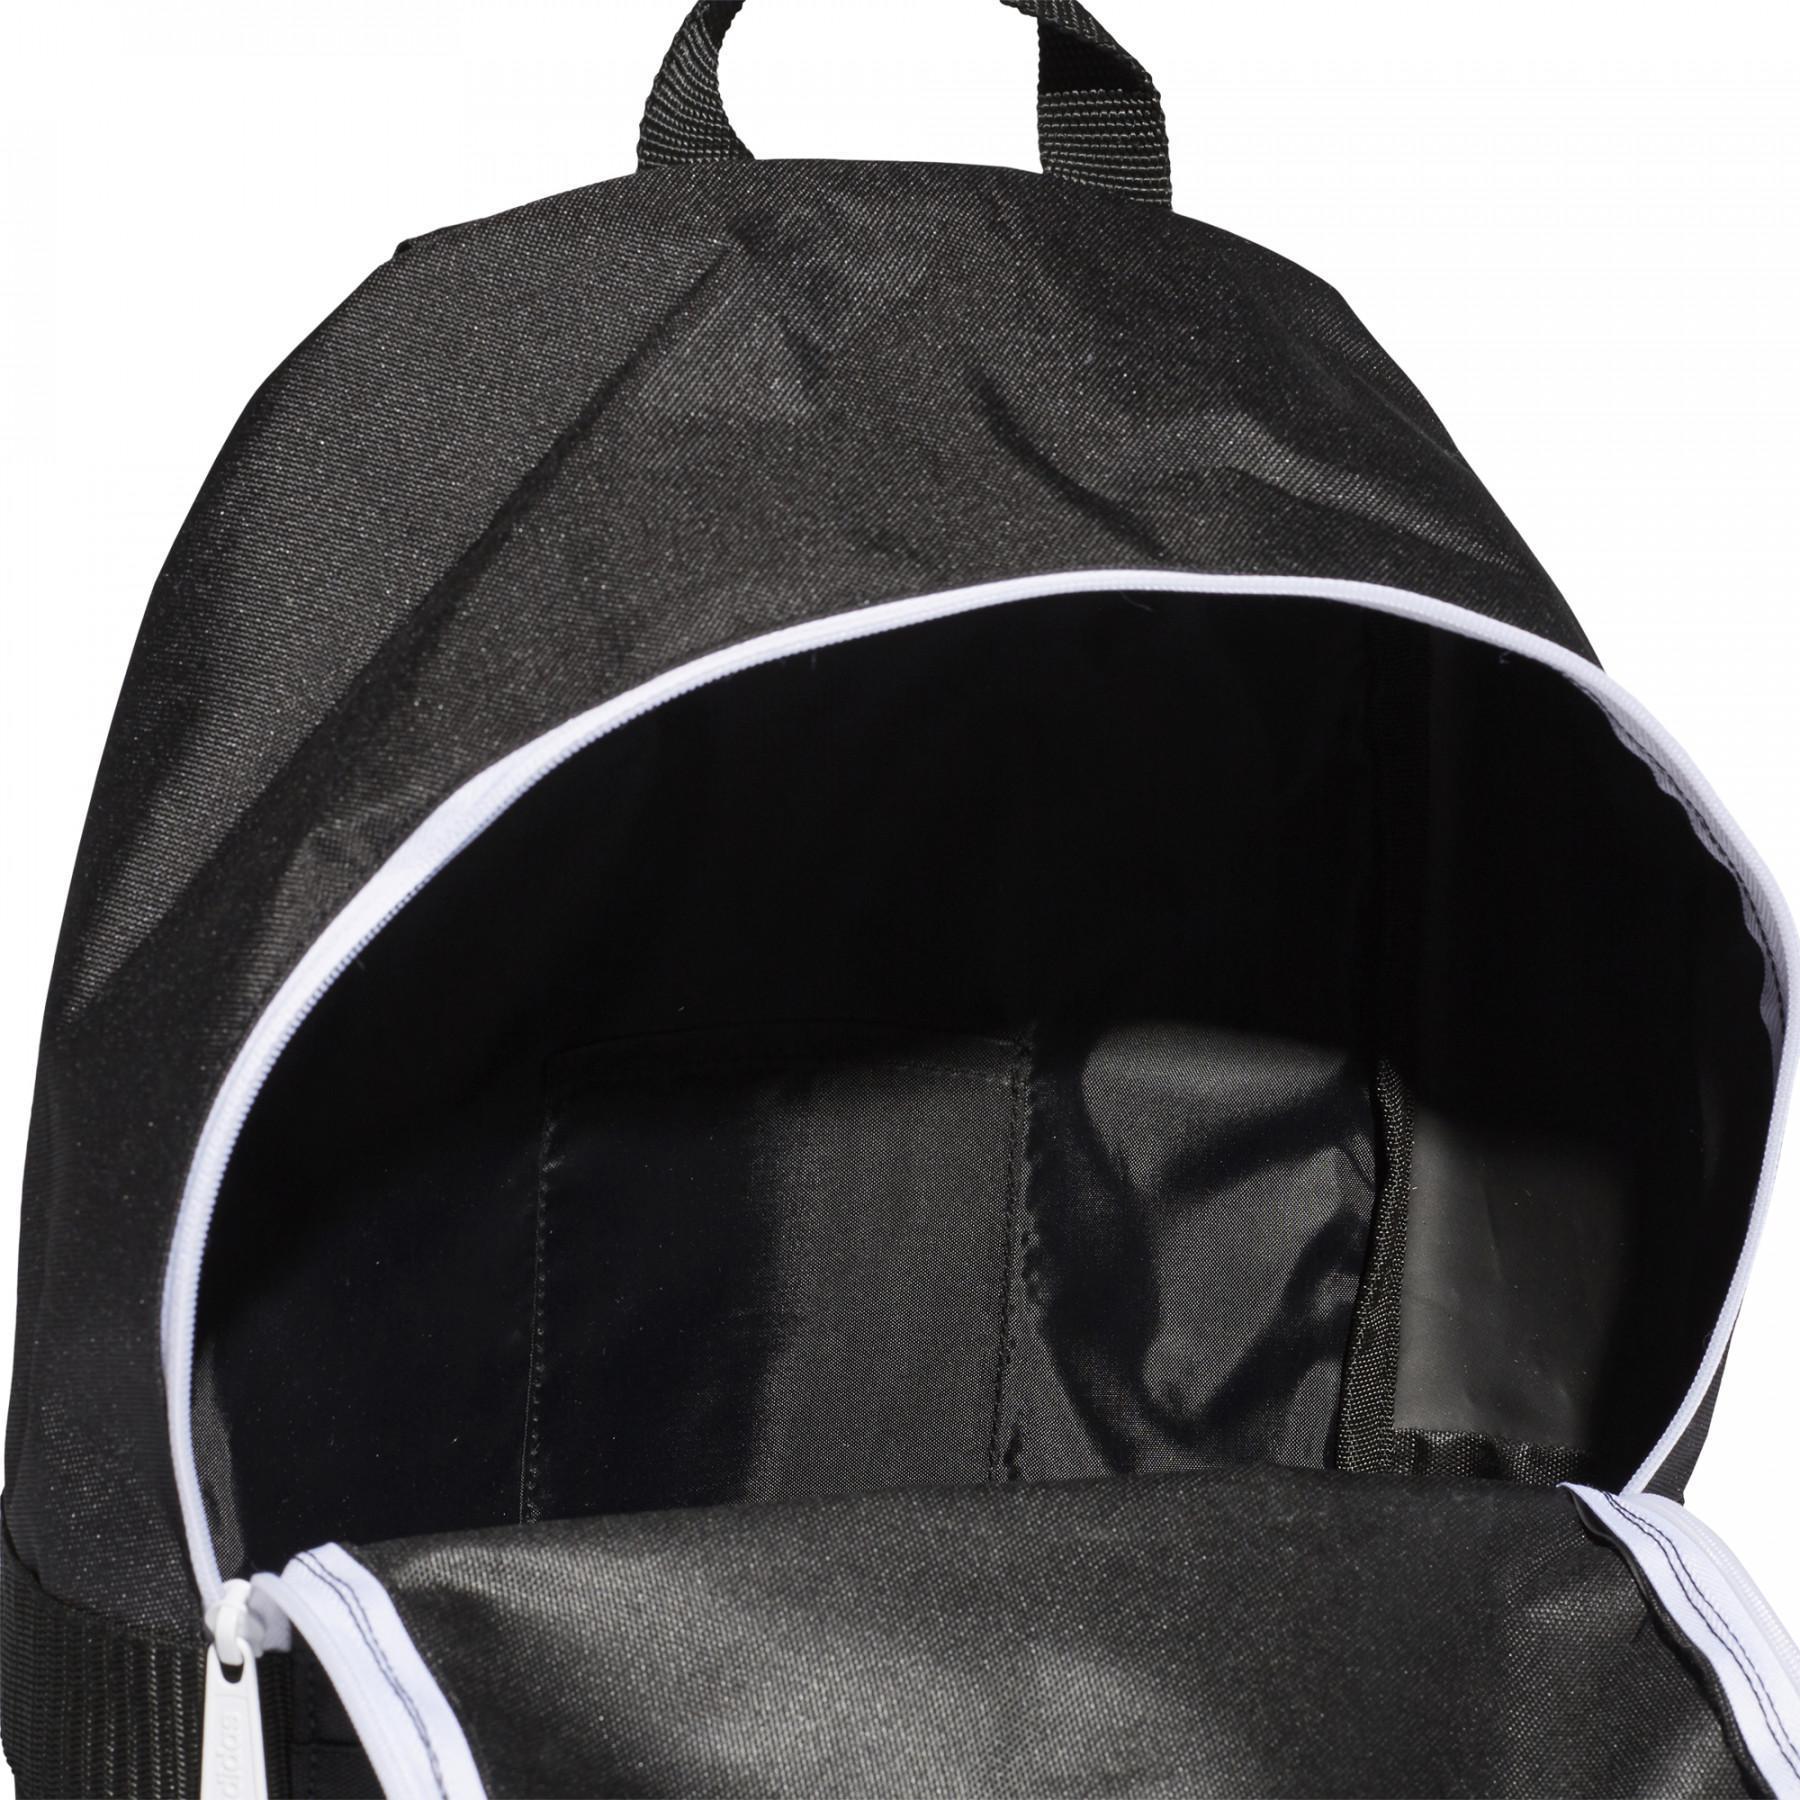 Backpack adidas Linear Classic Daily